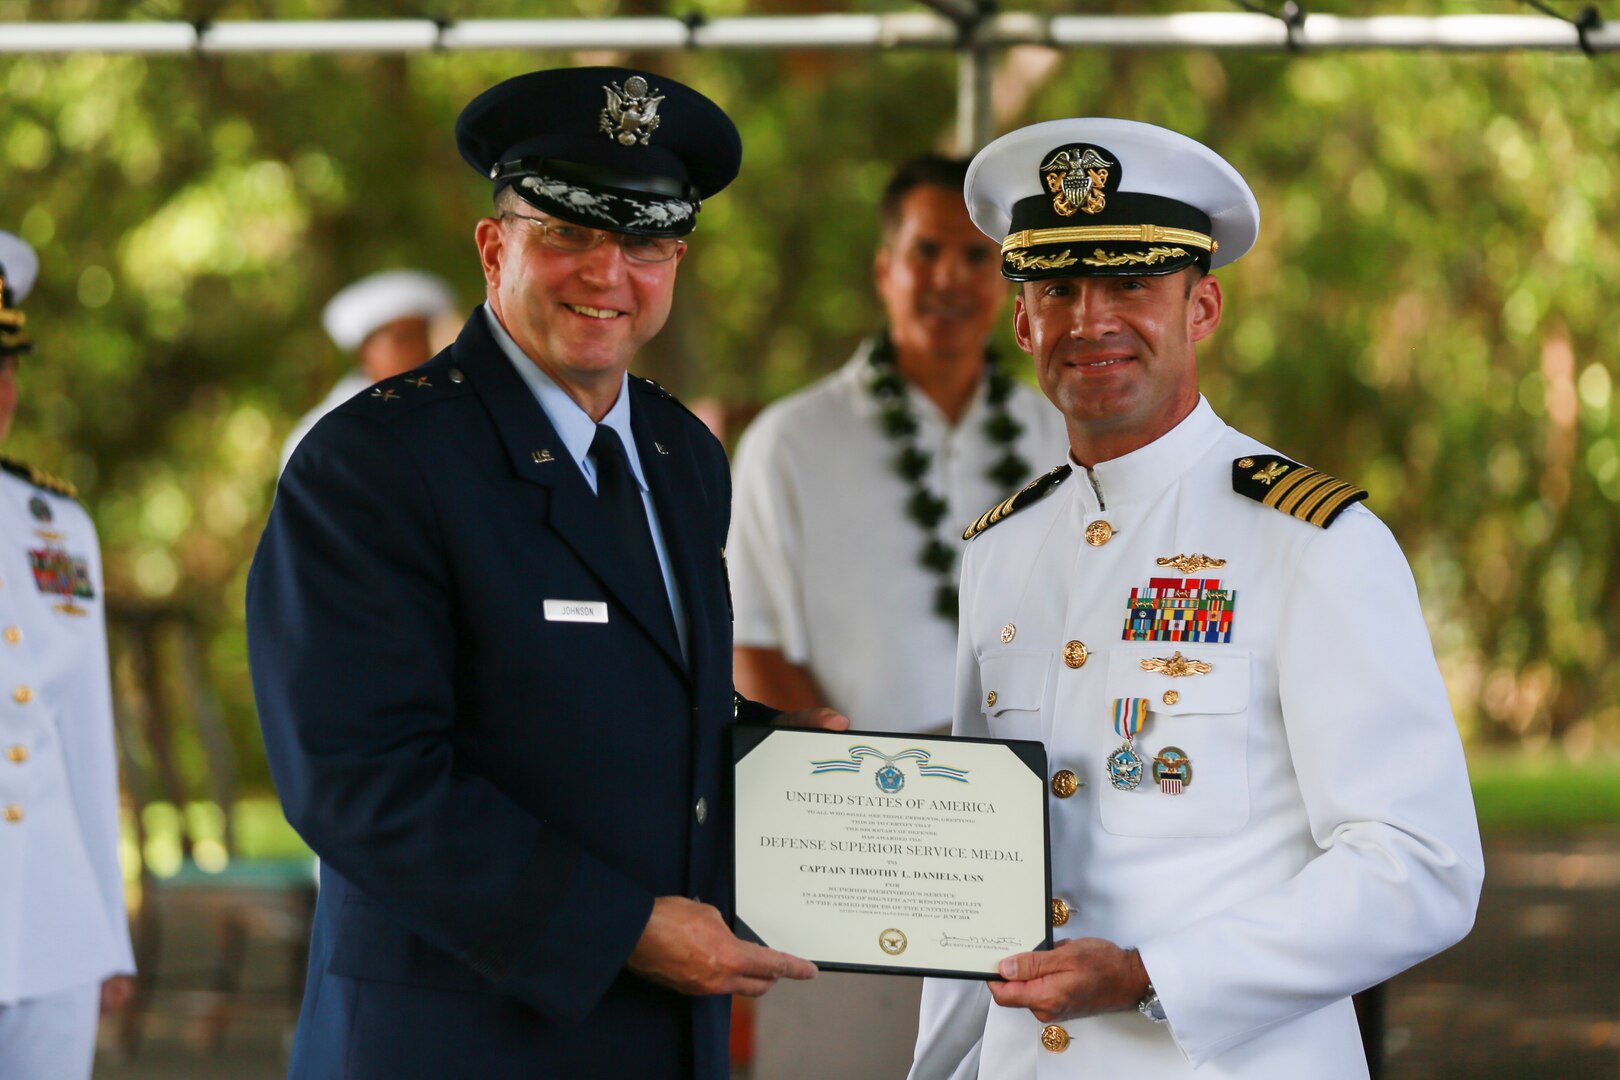 Navy Capt. Timothy Daniels (right) is presented his Defense Superior Service award by Air Force Maj. Gen. Mark Johnson as the outgoing DLA Pacific commander, in a July 10 ceremony at Nob Hill on historic Ford Island, Pearl Harbor, Hawaii (Photo by Marine Cpl. Patrick Mahoney)